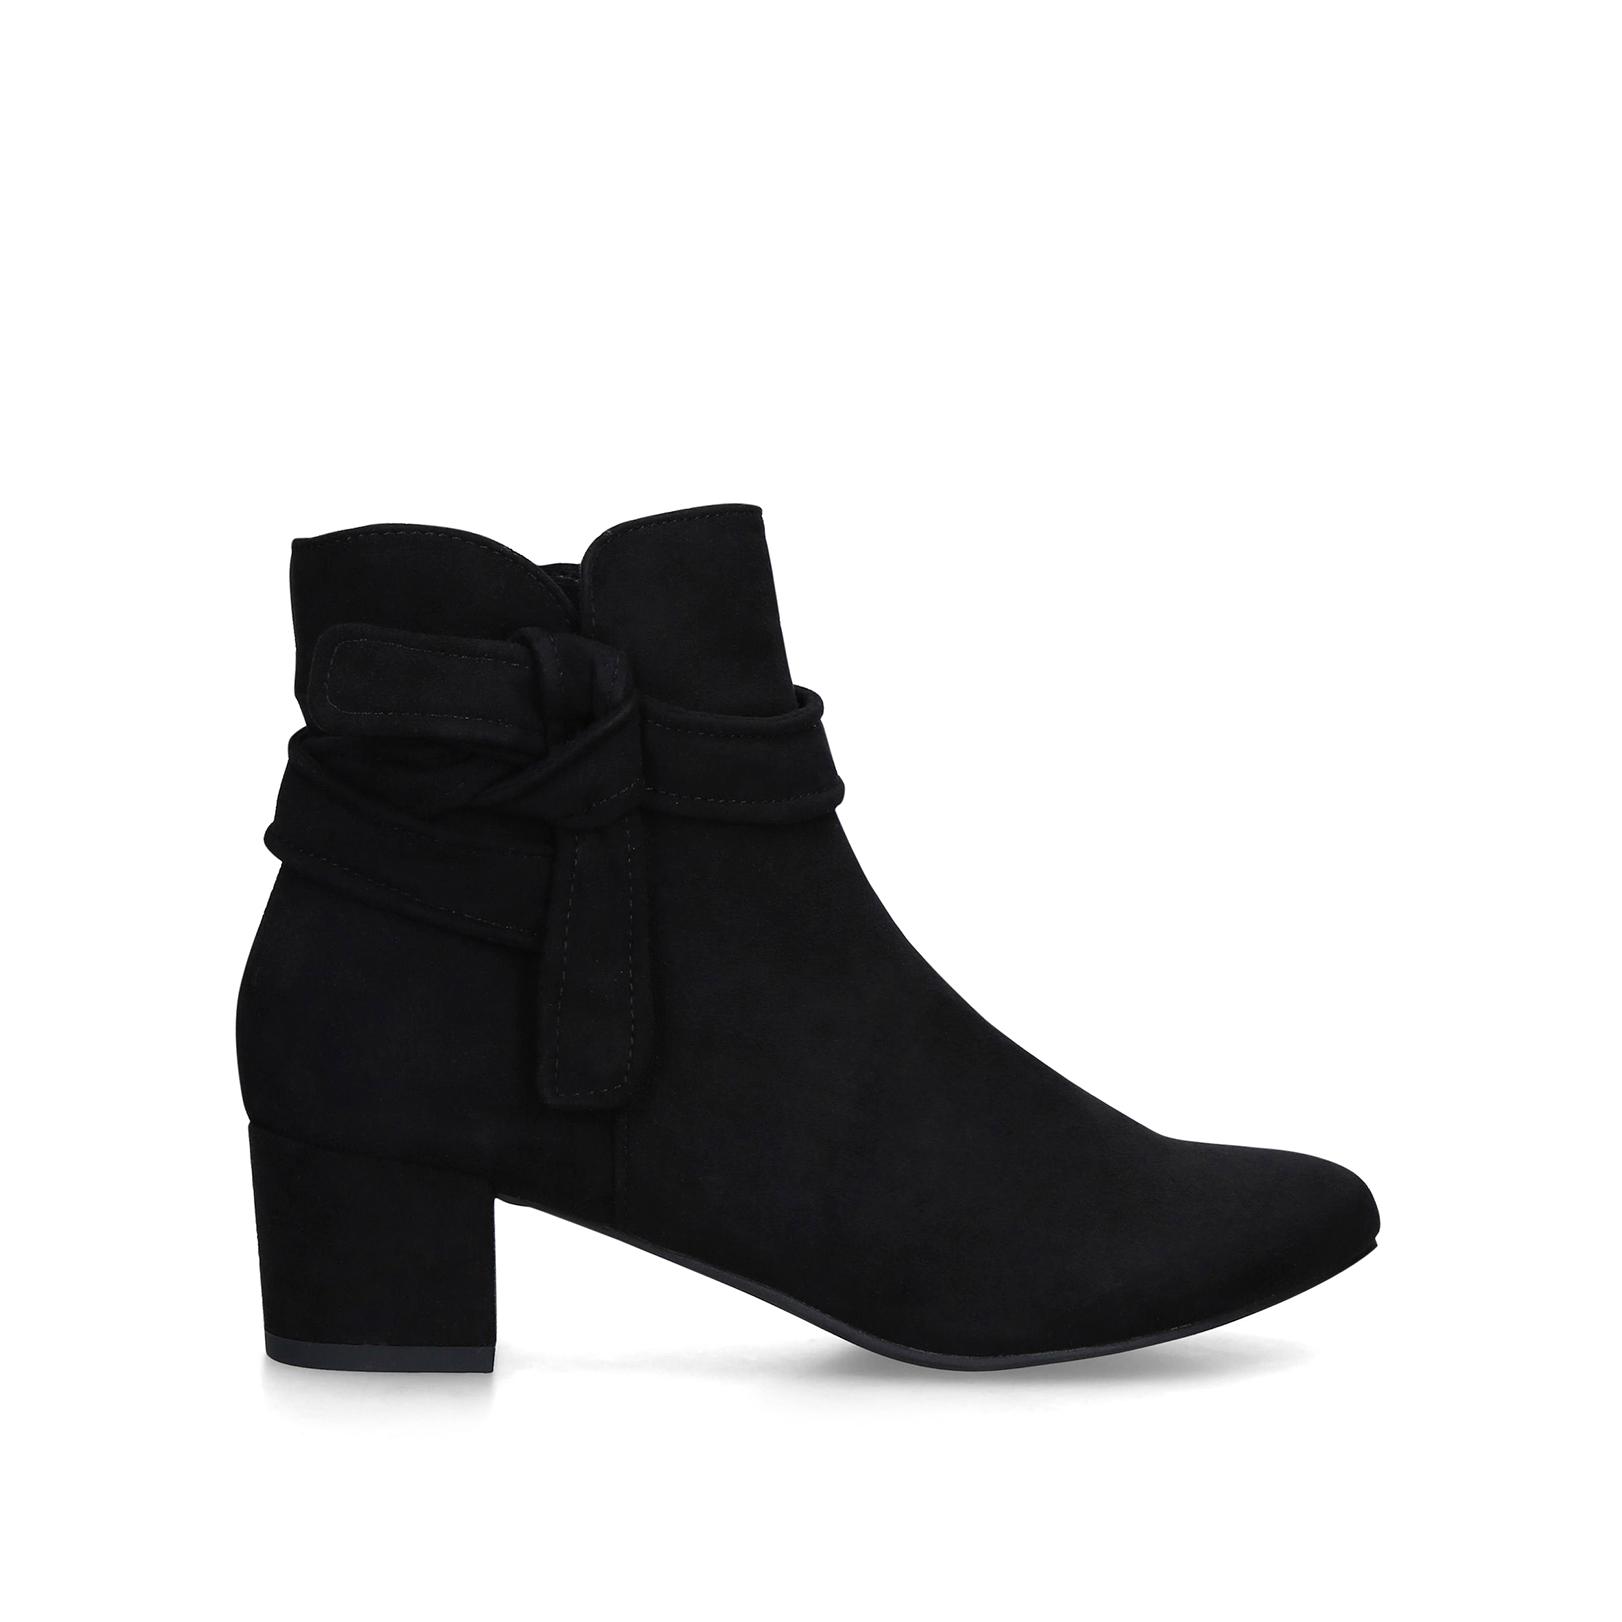 CARSON - NINE WEST Ankle Boots